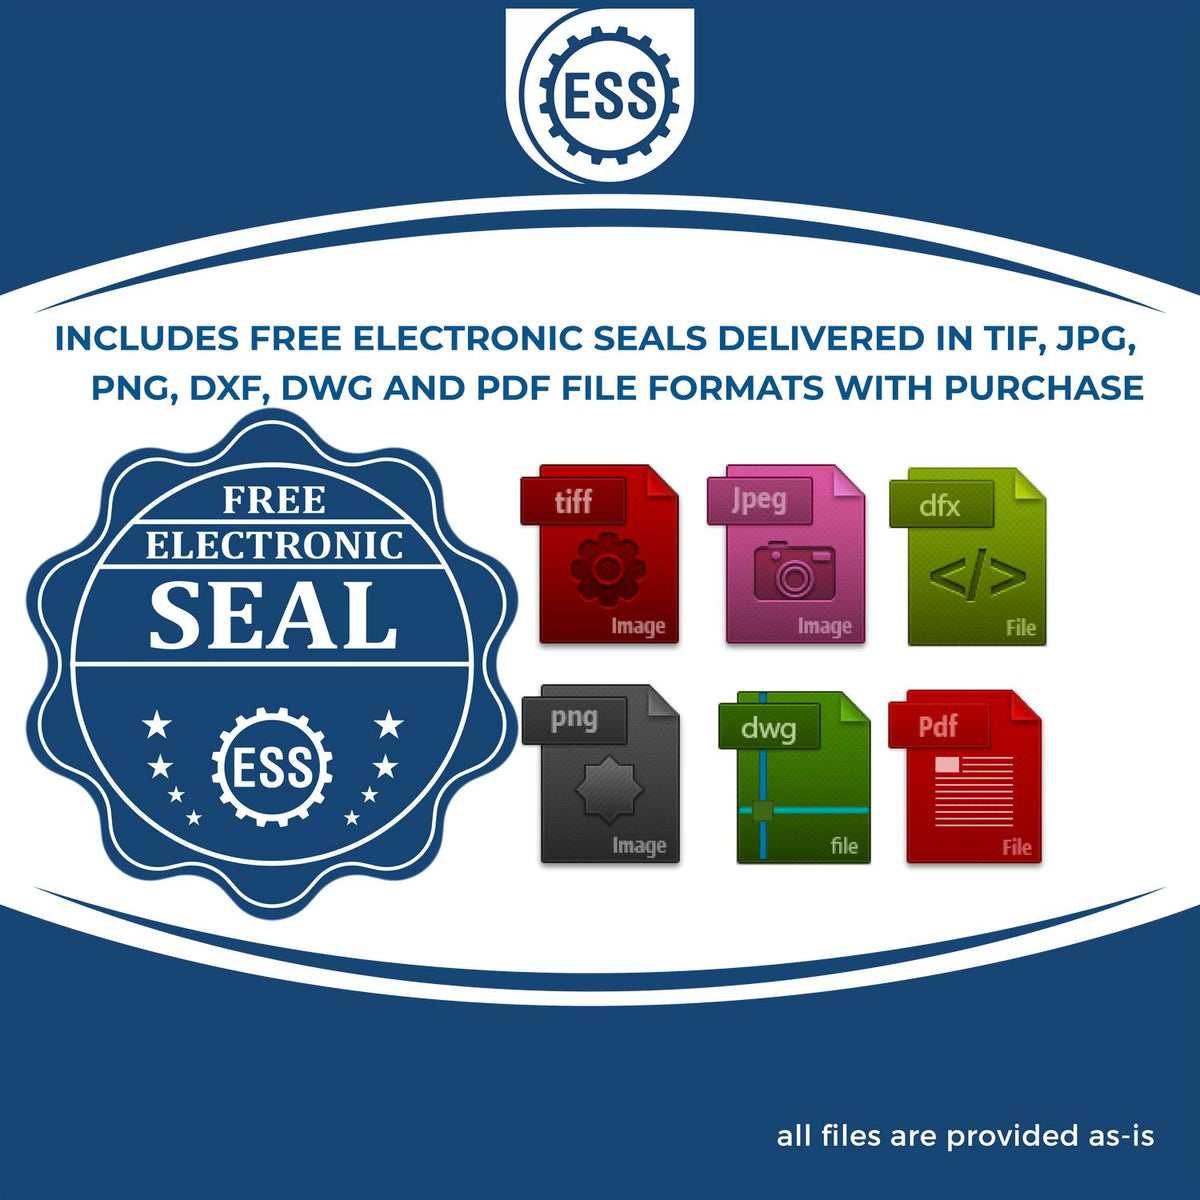 An infographic for the free electronic seal for the Slim Pre-Inked District of Columbia Professional Engineer Seal Stamp illustrating the different file type icons such as DXF, DWG, TIF, JPG and PNG.